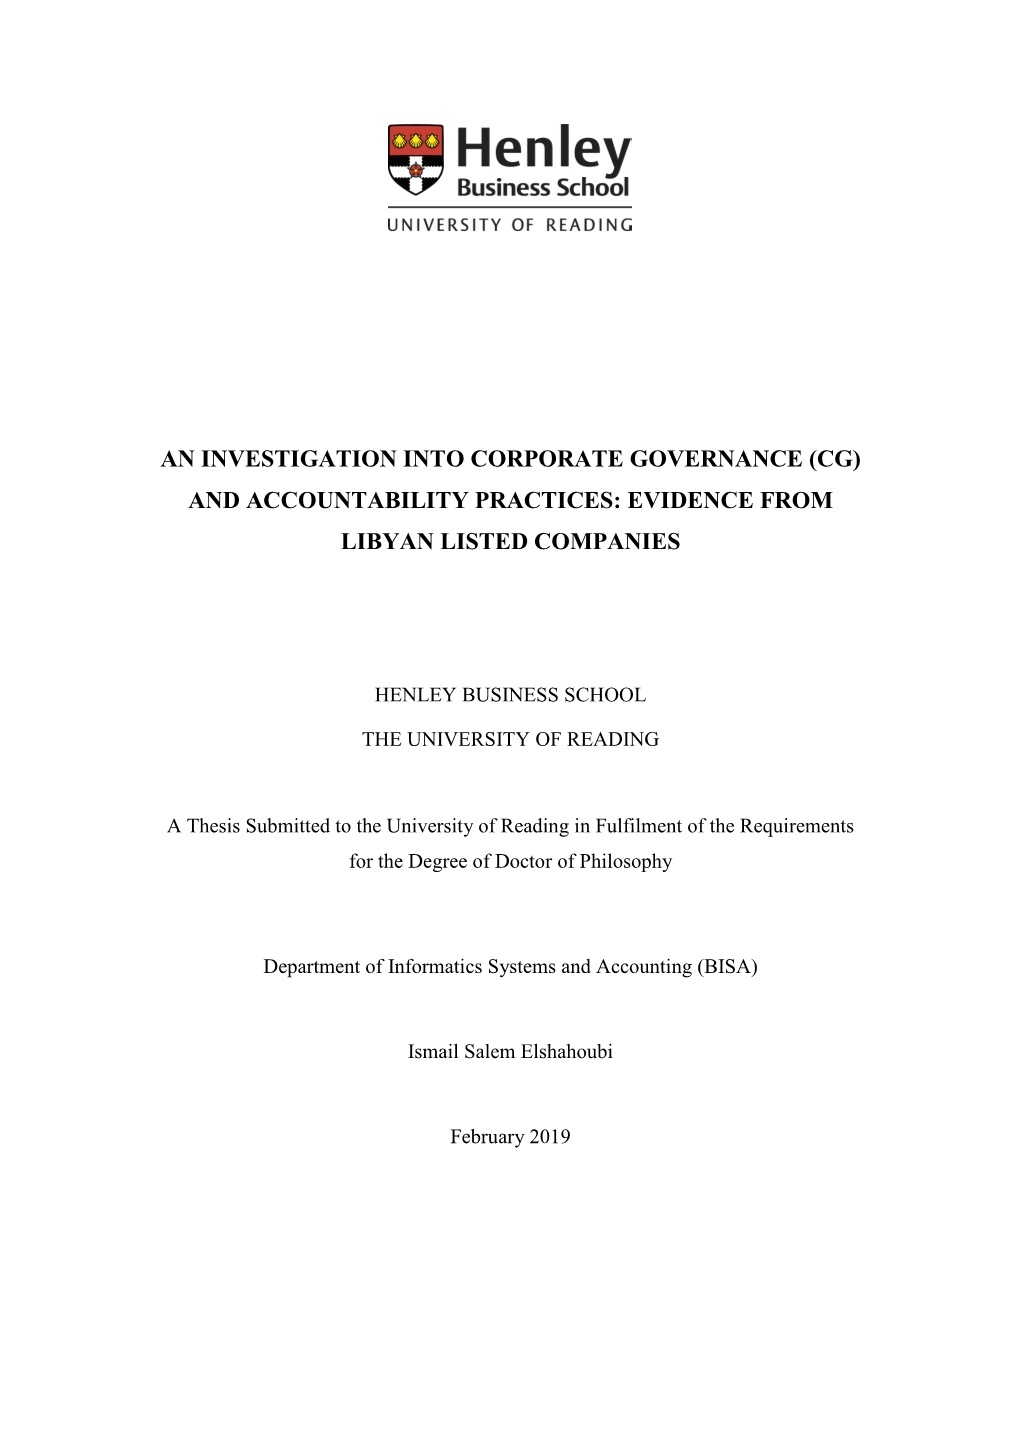 An Investigation Into Corporate Governance (Cg) and Accountability Practices: Evidence from Libyan Listed Companies